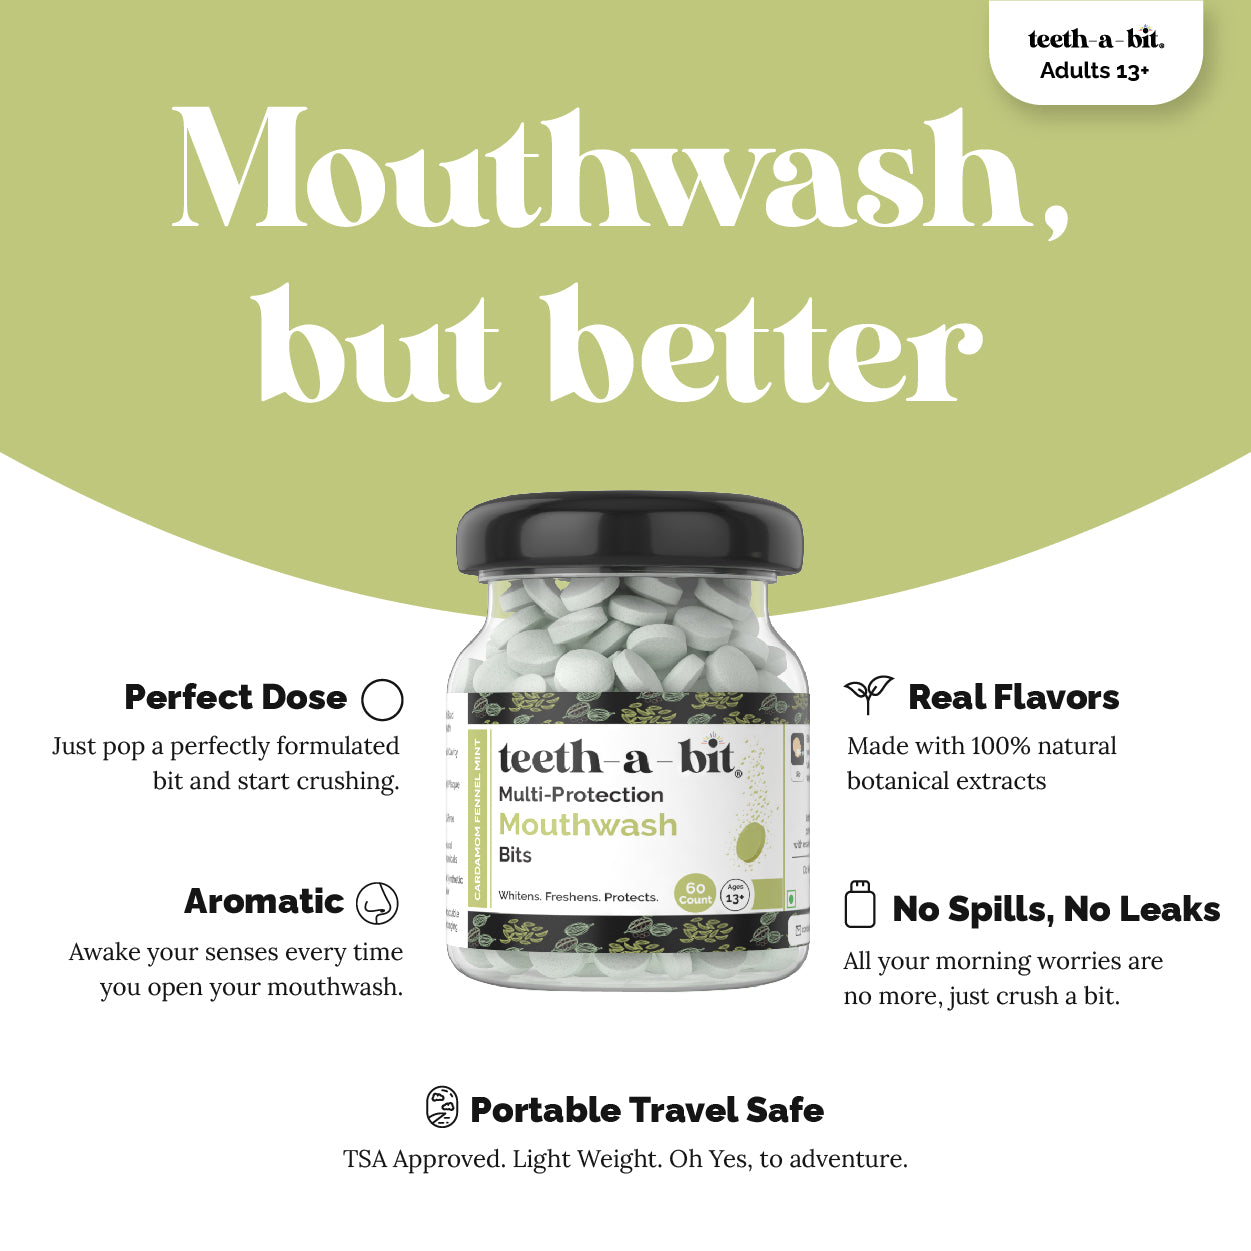 teeth-a-bit Multiprotection Cardamom Fennel Mint Mouthwash tablets (60 Count)